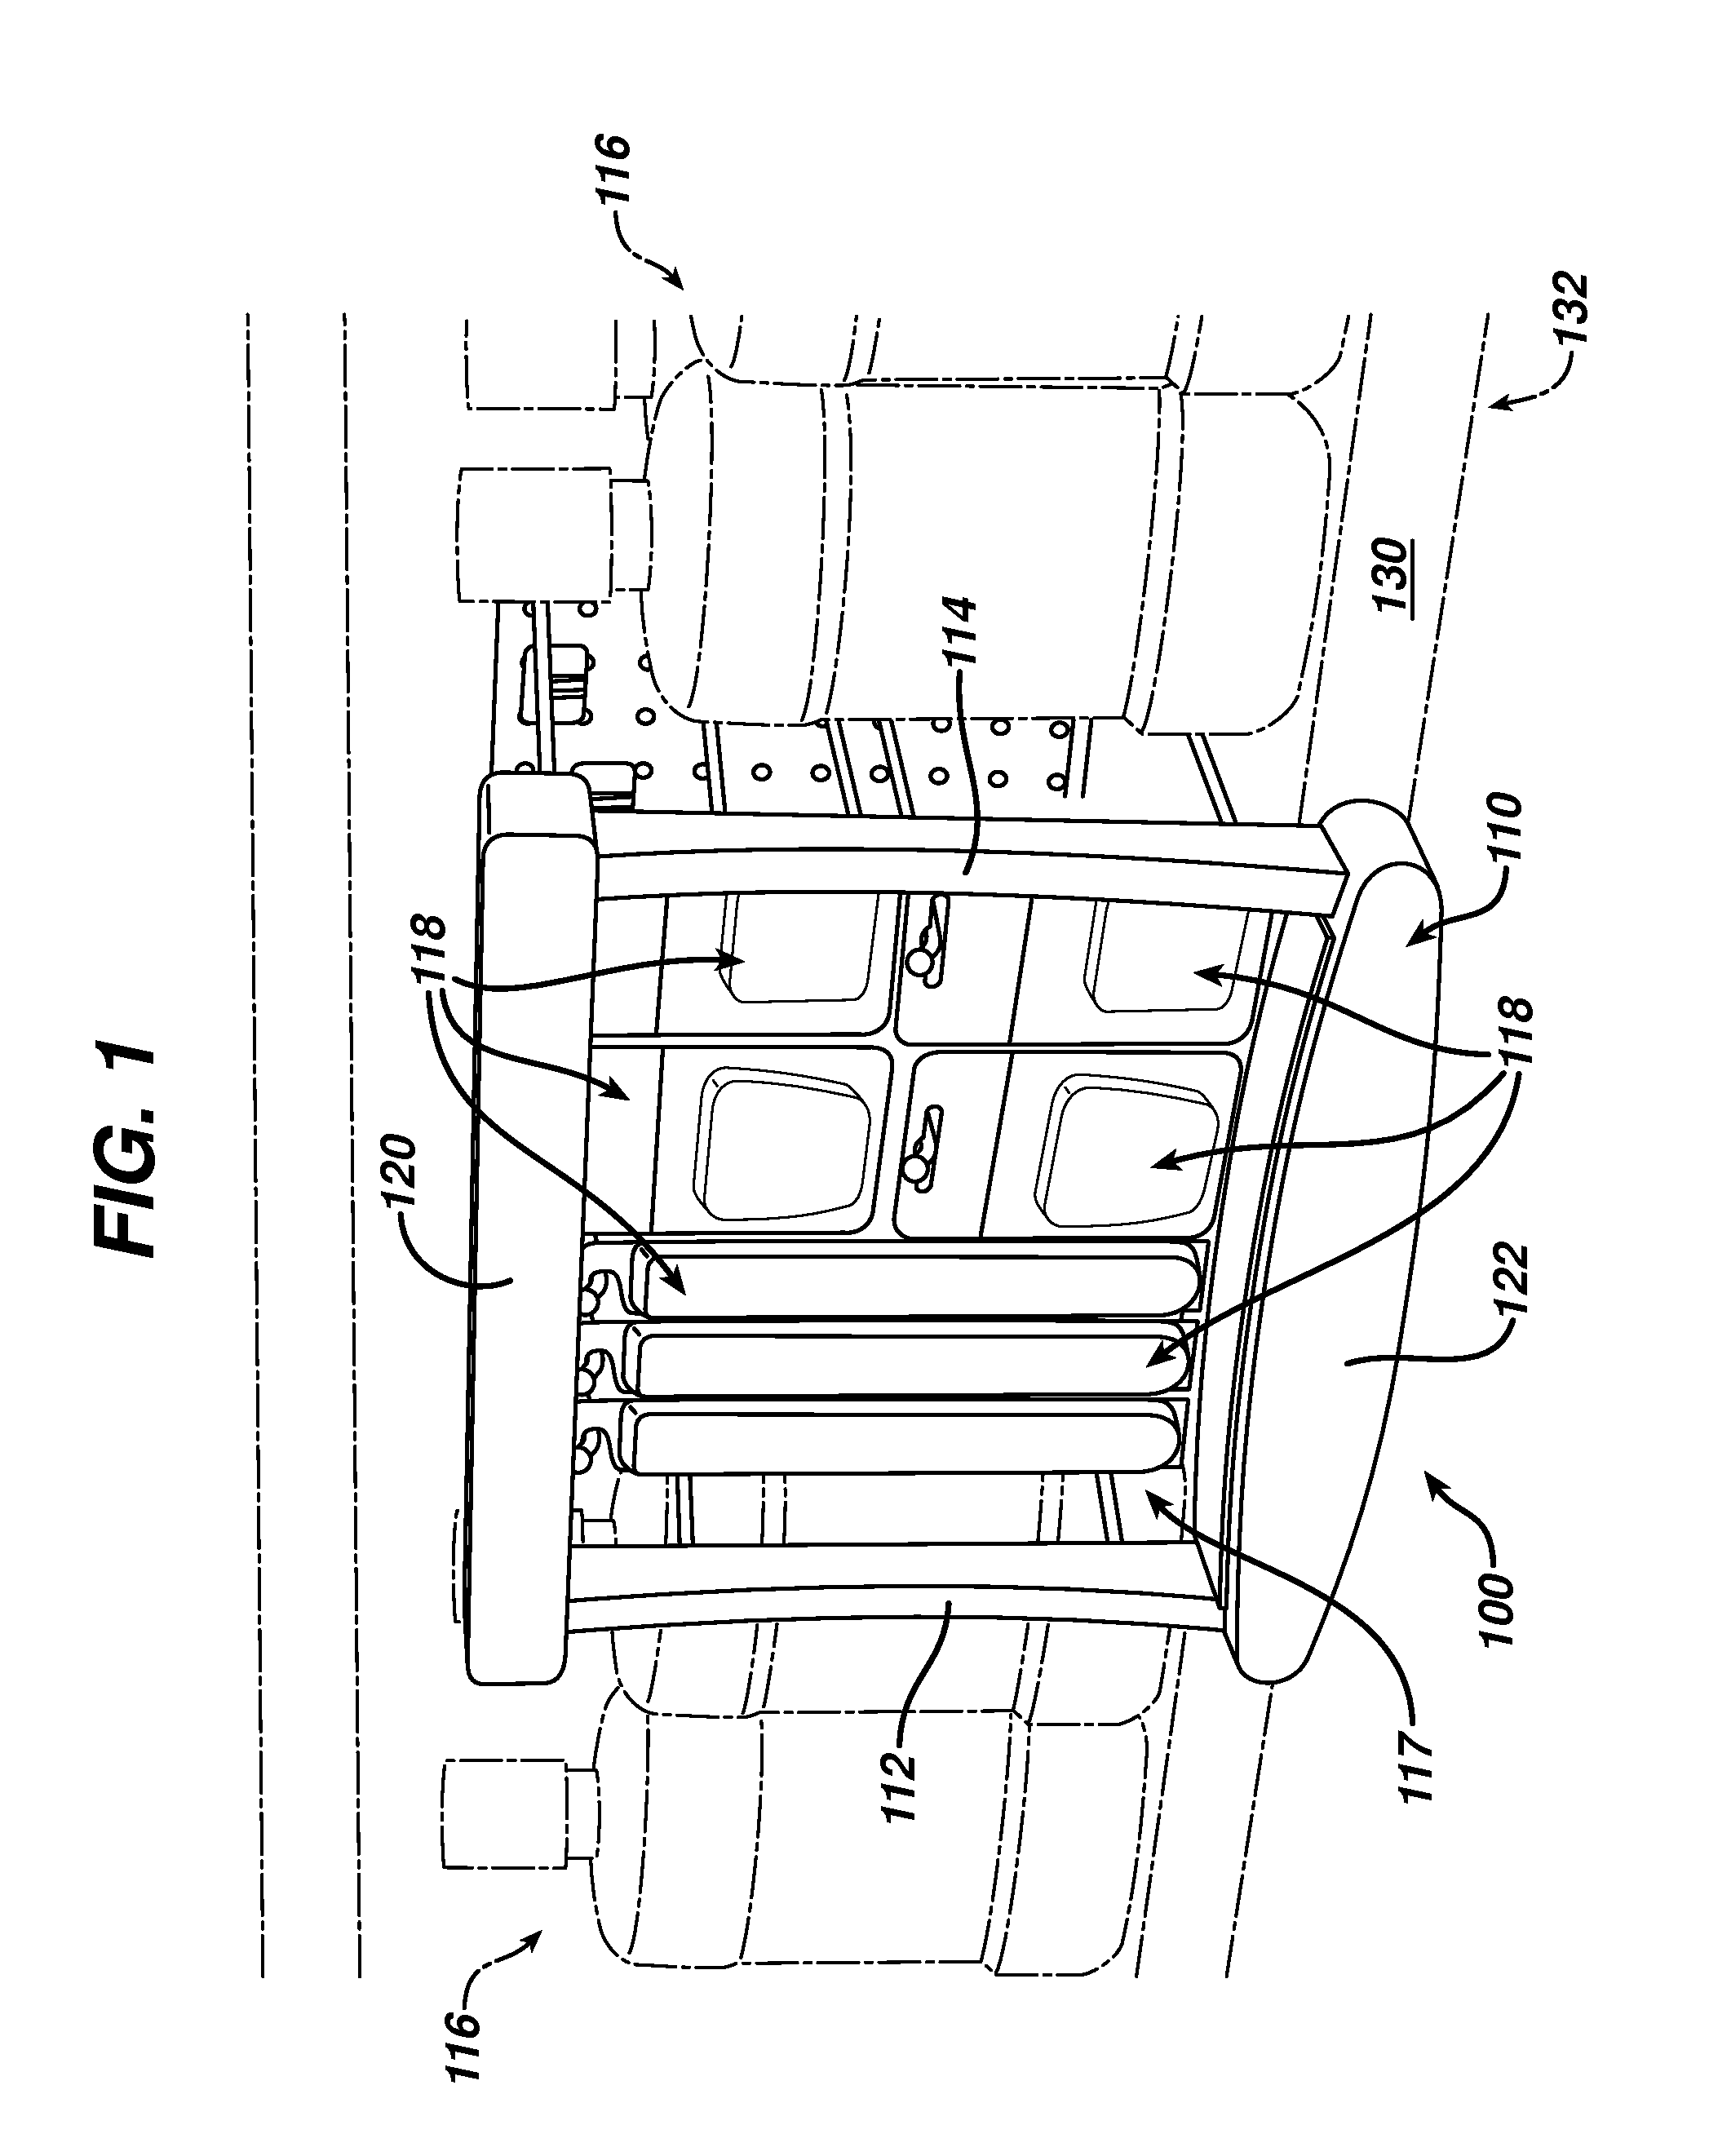 Method and apparatus for displaying and selling products